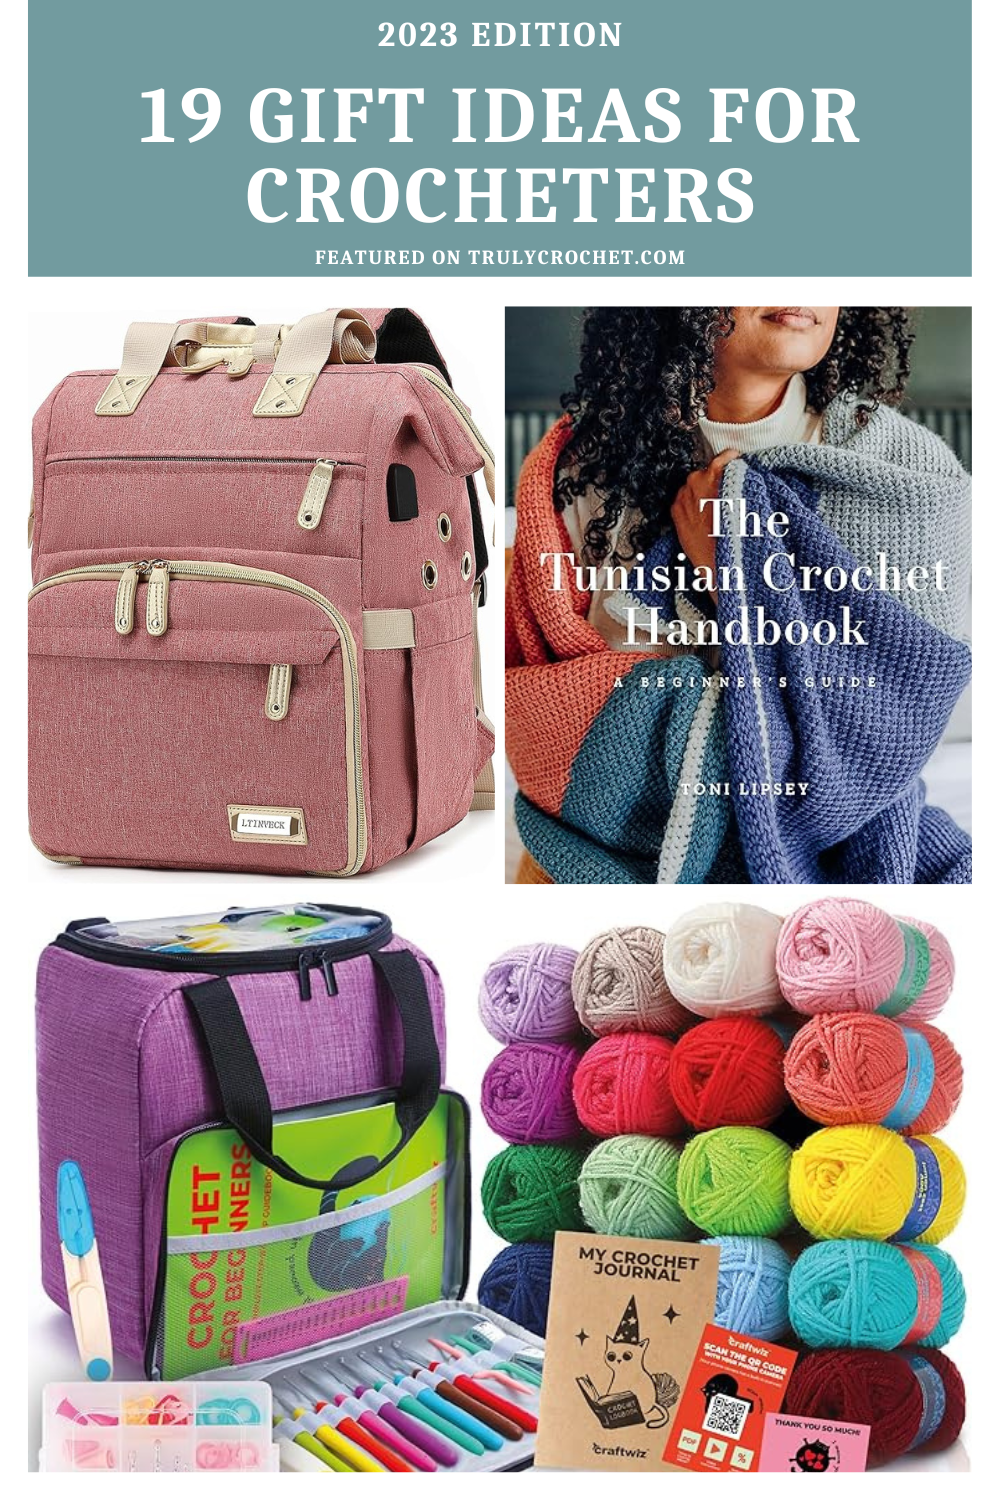 19 Gift Ideas For Crocheters - 2023 edition